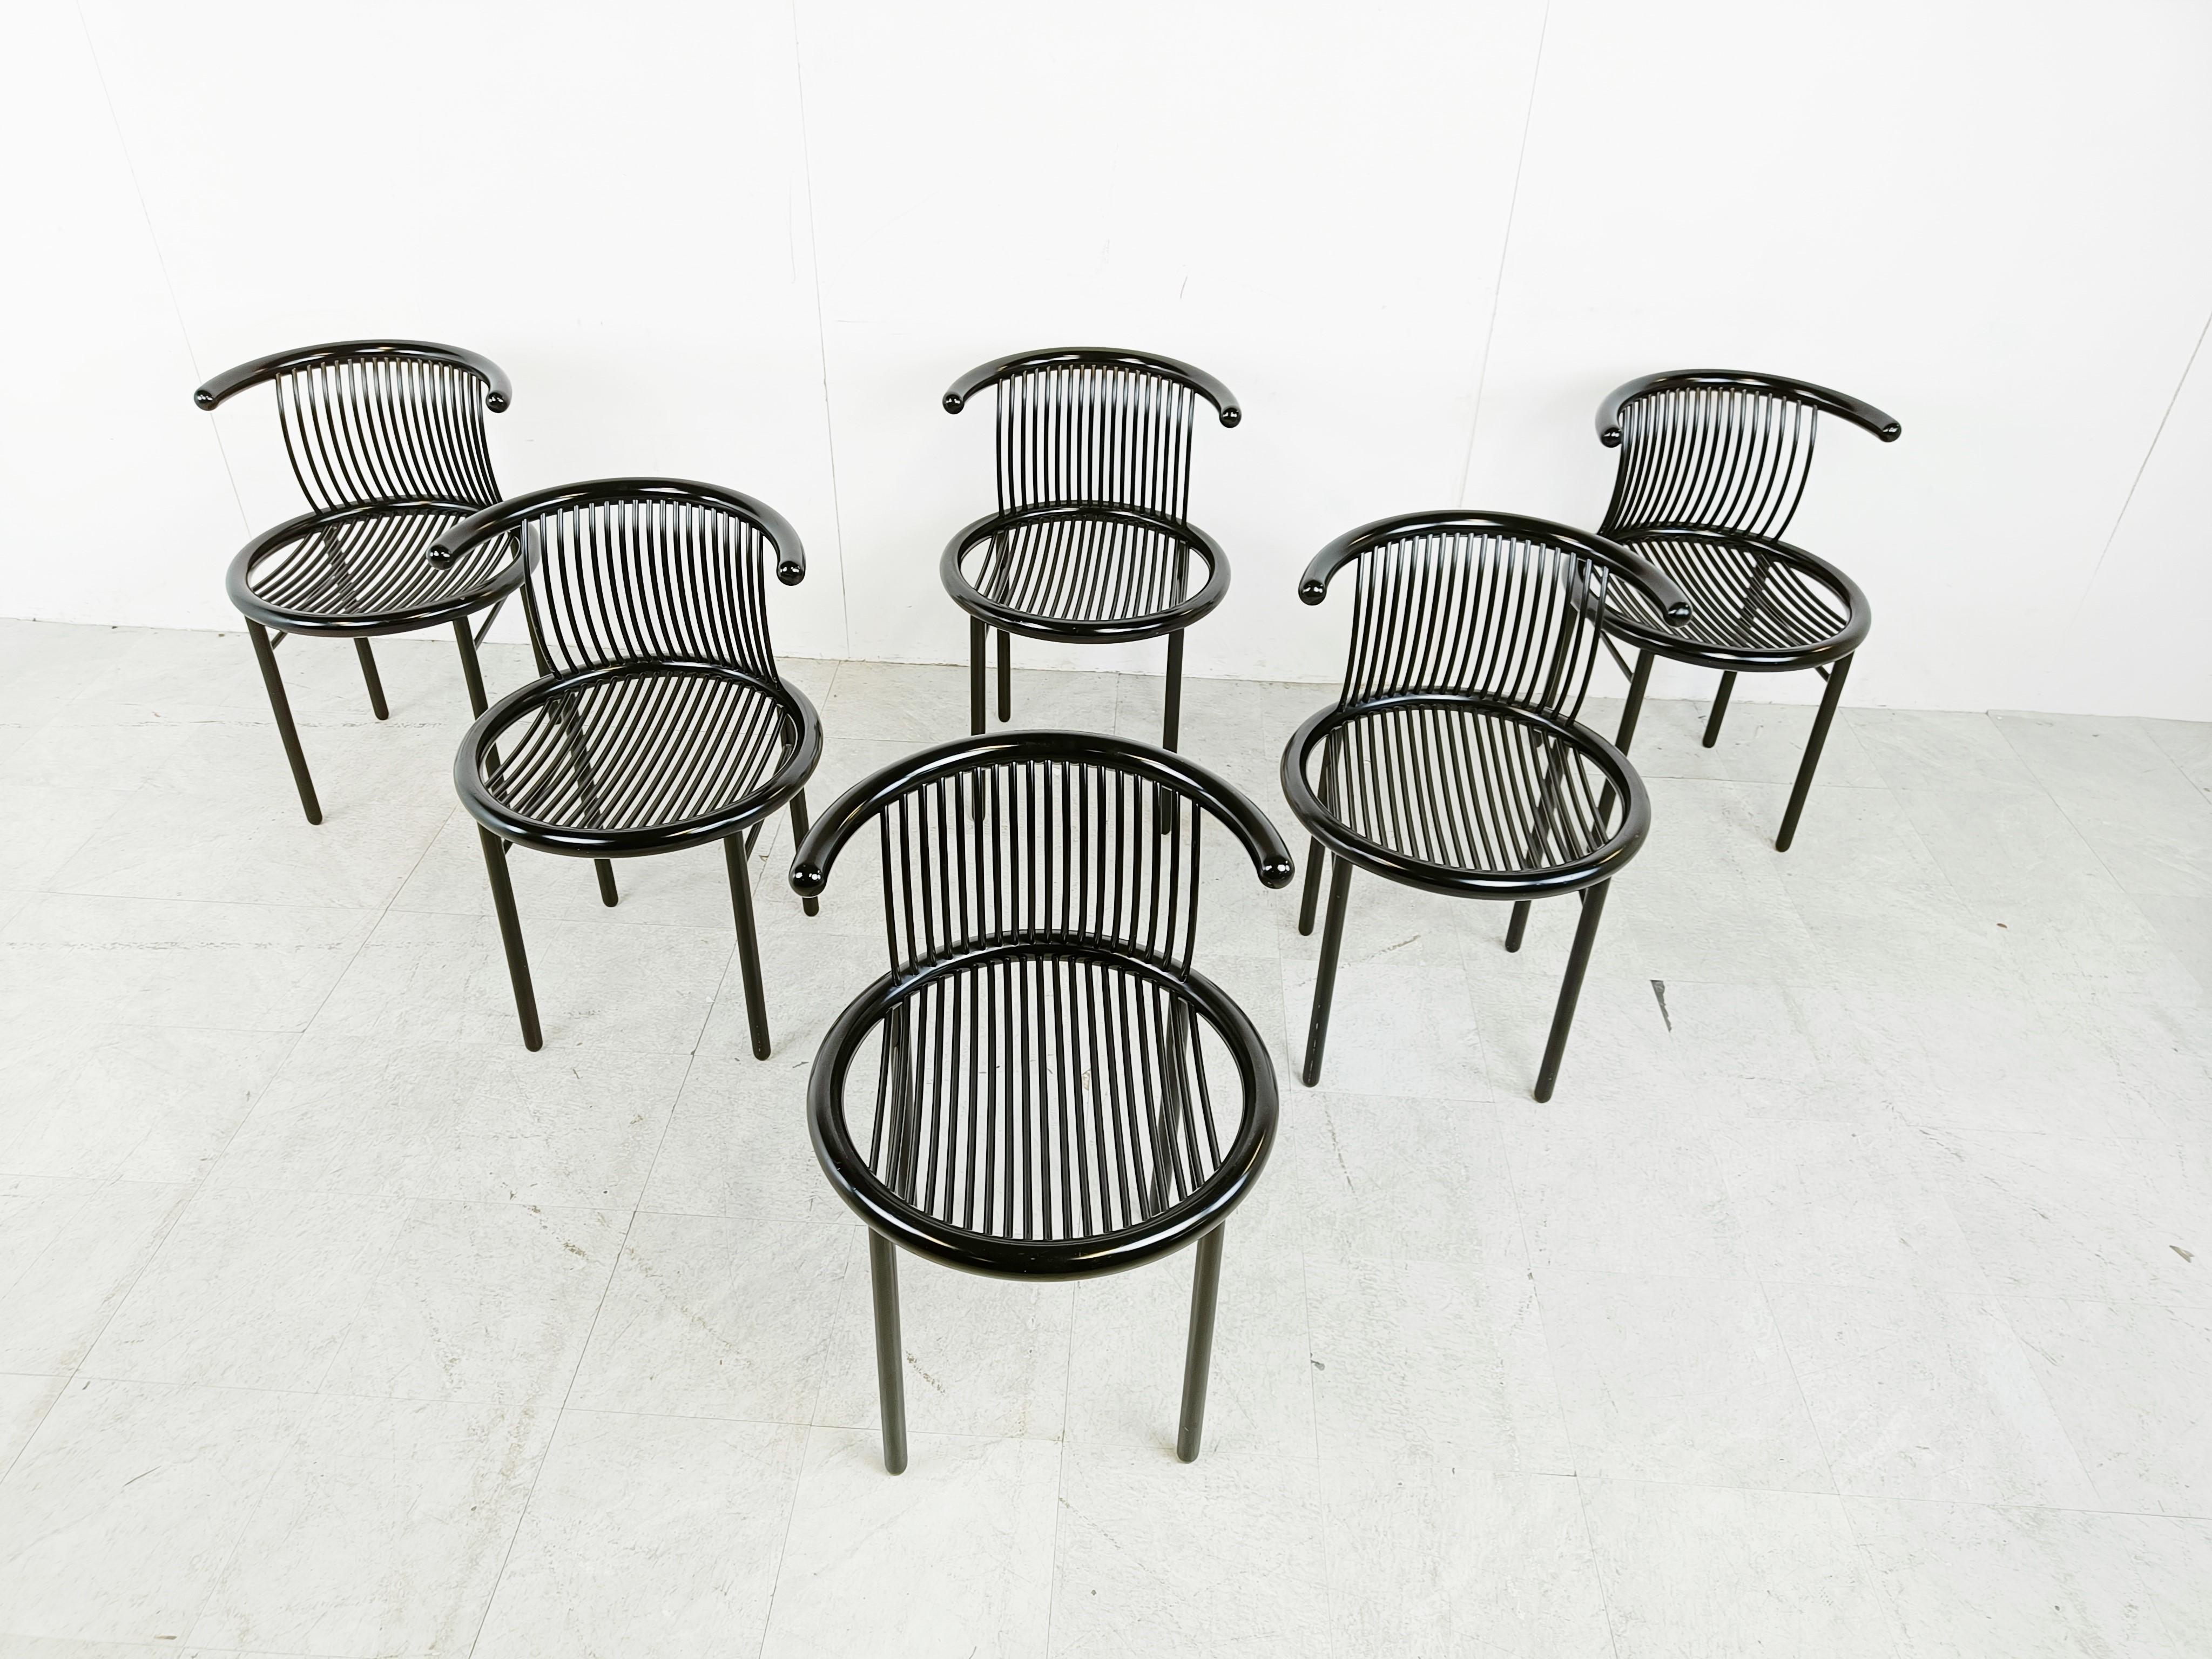 Set of 6 'Circo' dining chairs designed by Hutta & Herbert Ohl for Lübke in the 1980s.

They chairs are made of a light black lacquered wood.

Beautiful timeless design.

Perfect condition

1980s - Germany

Dimensions:
Height: 76cm/35.43